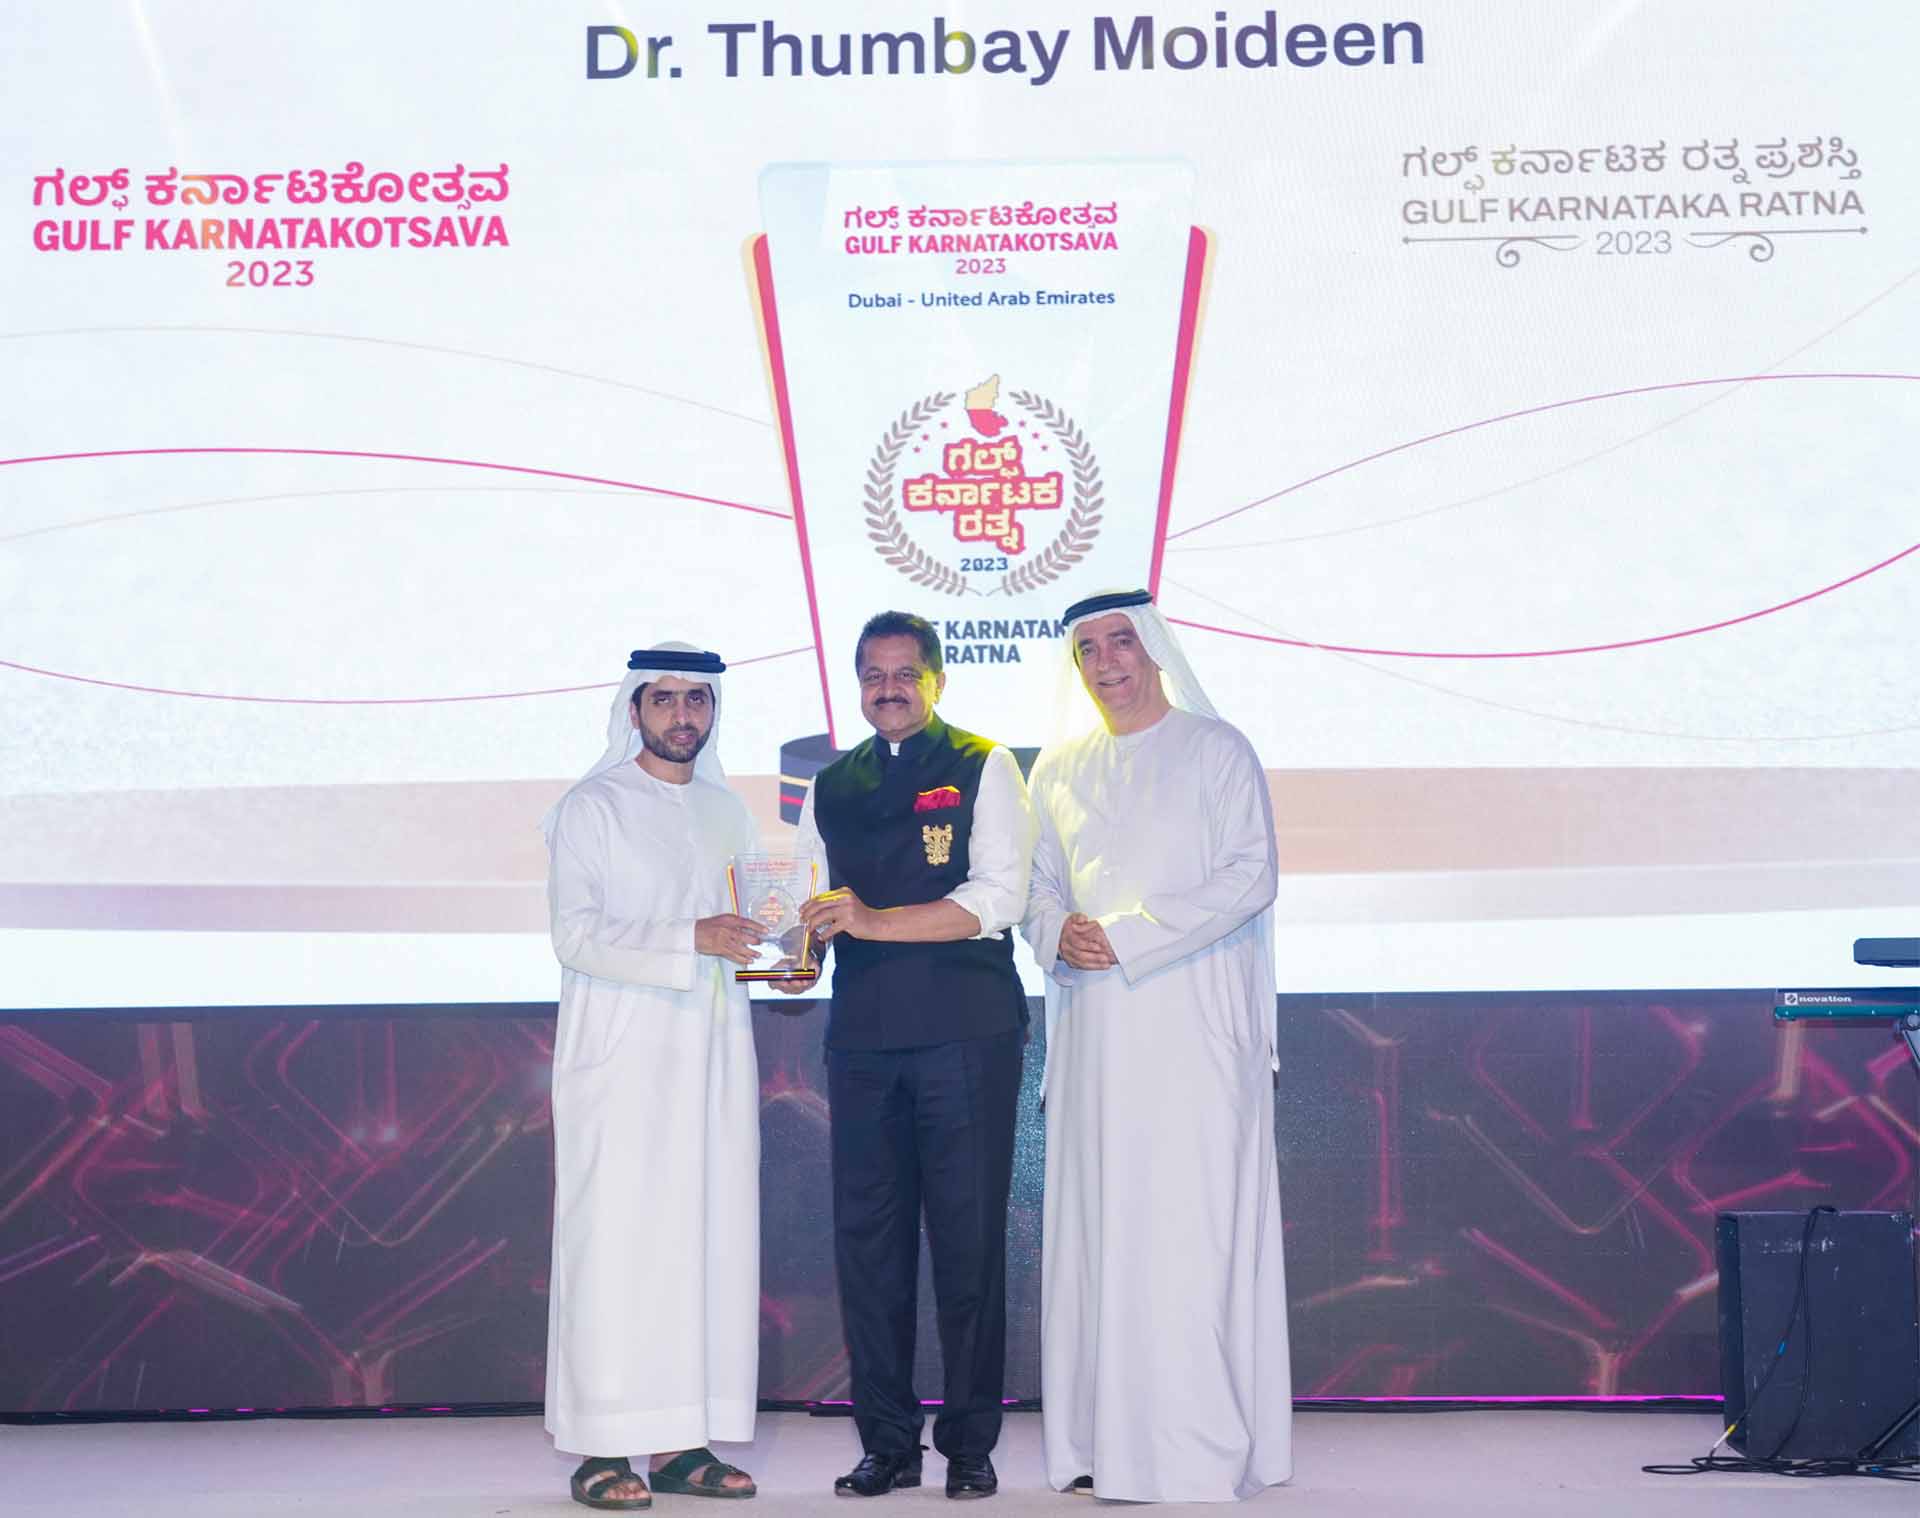 Dr. Thumbay Moideen Honored with Gulf Karnataka Ratna Award, Recognized as a Top Leader and Most Influential Icon 2023